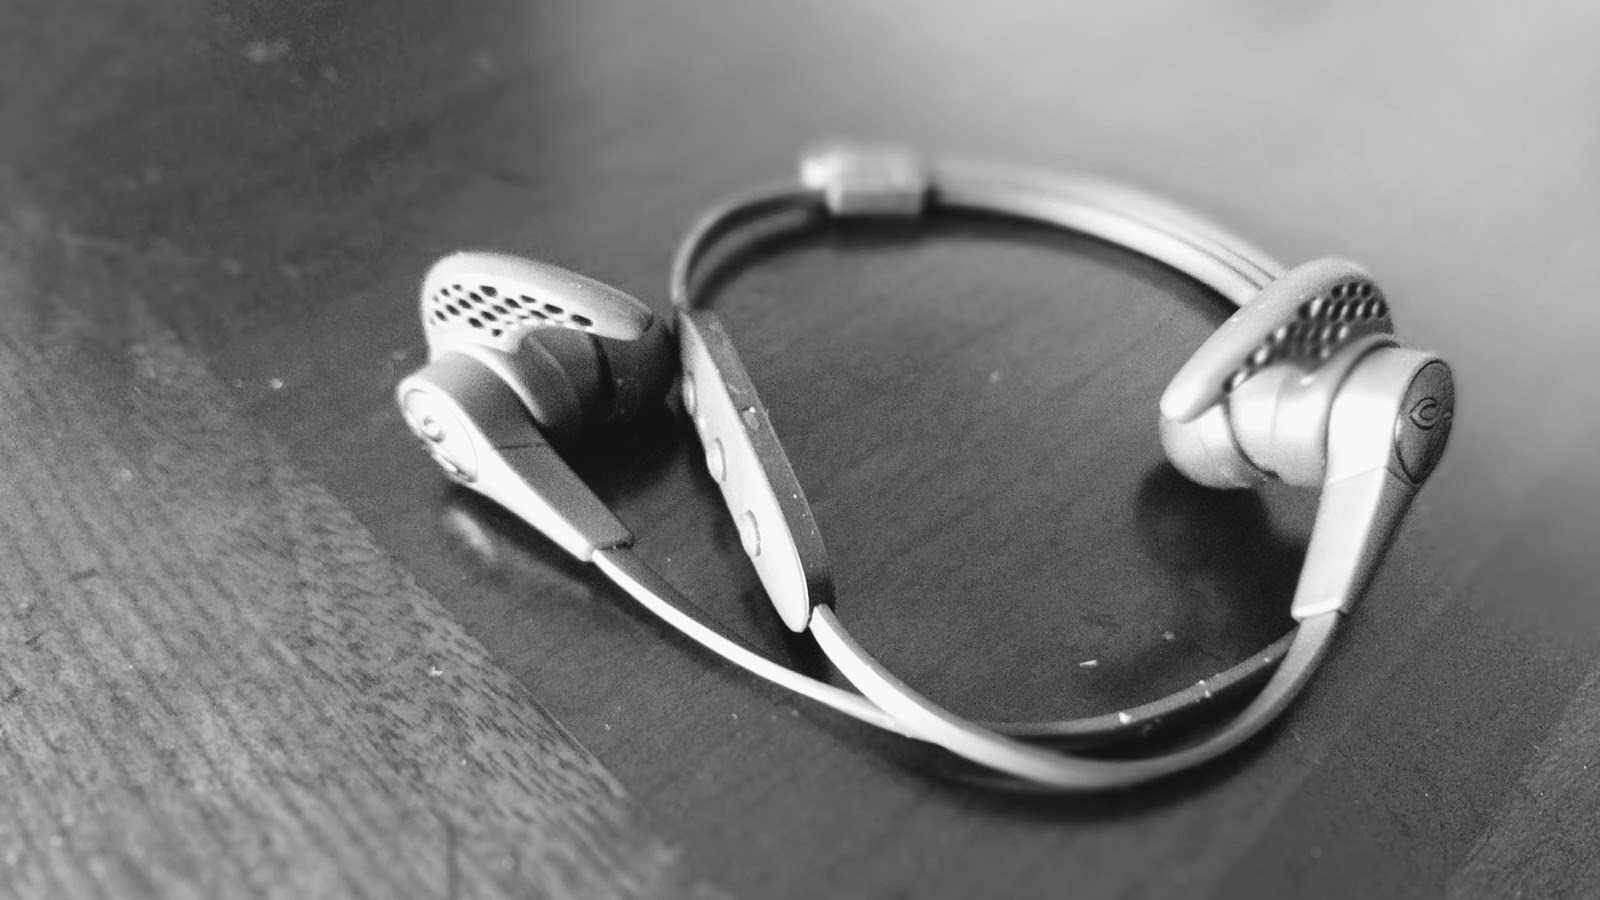 Black & white photo of a pair of Jaybird X3 earbuds